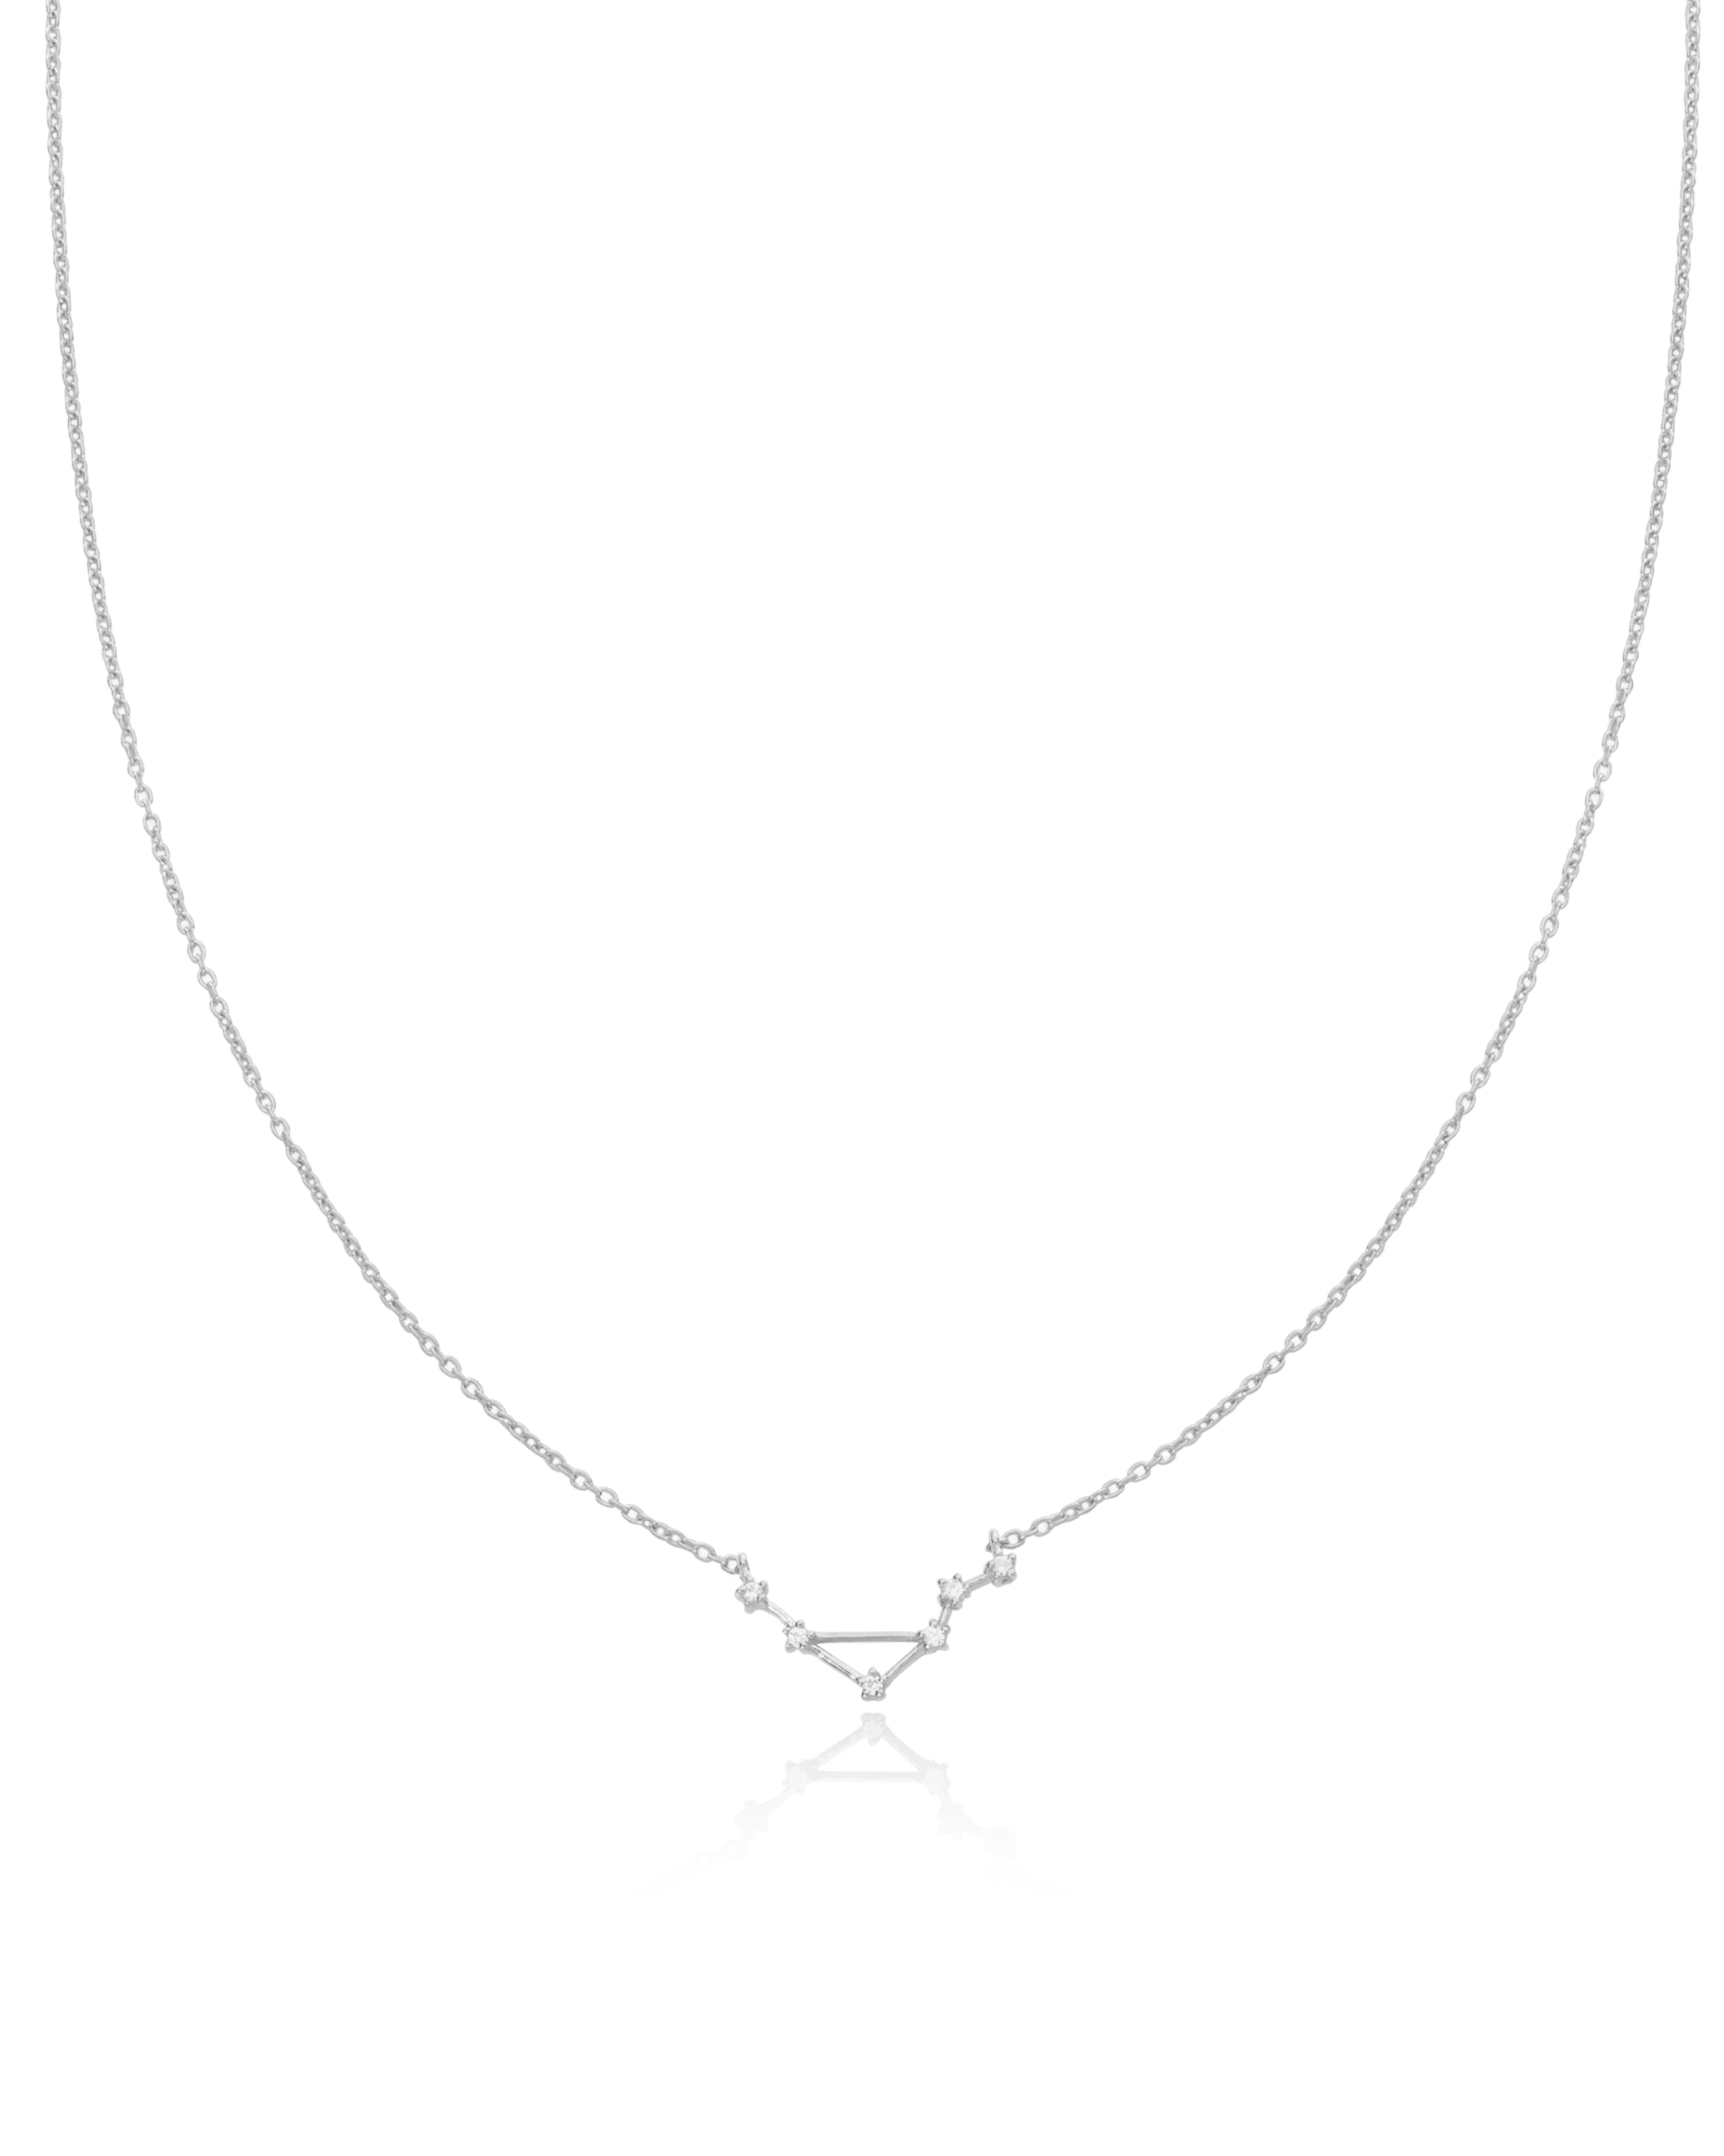 Sets of Constellation Necklaces - 925 Sterling Silver Necklaces magal-dev 